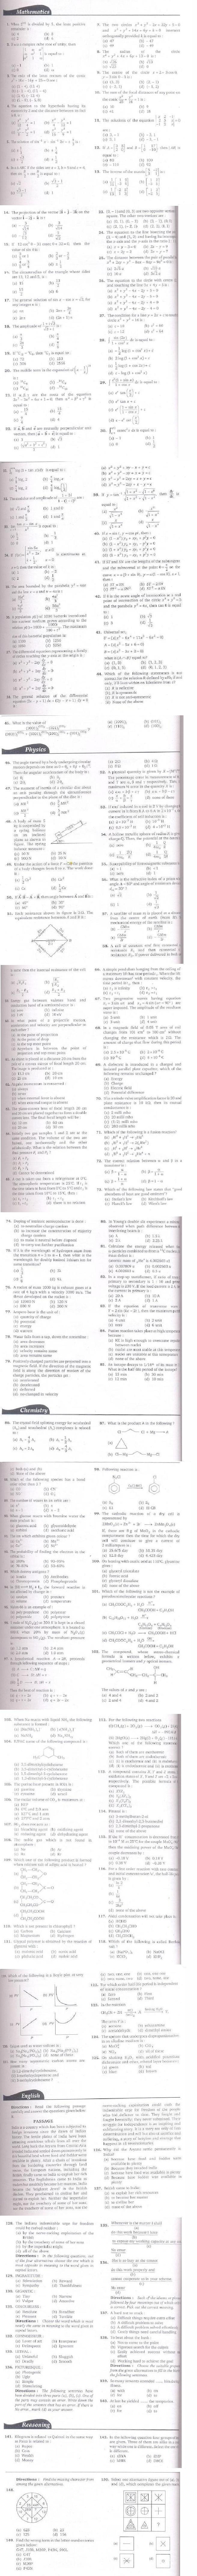 BITSAT 2006 Question Paper with Answers